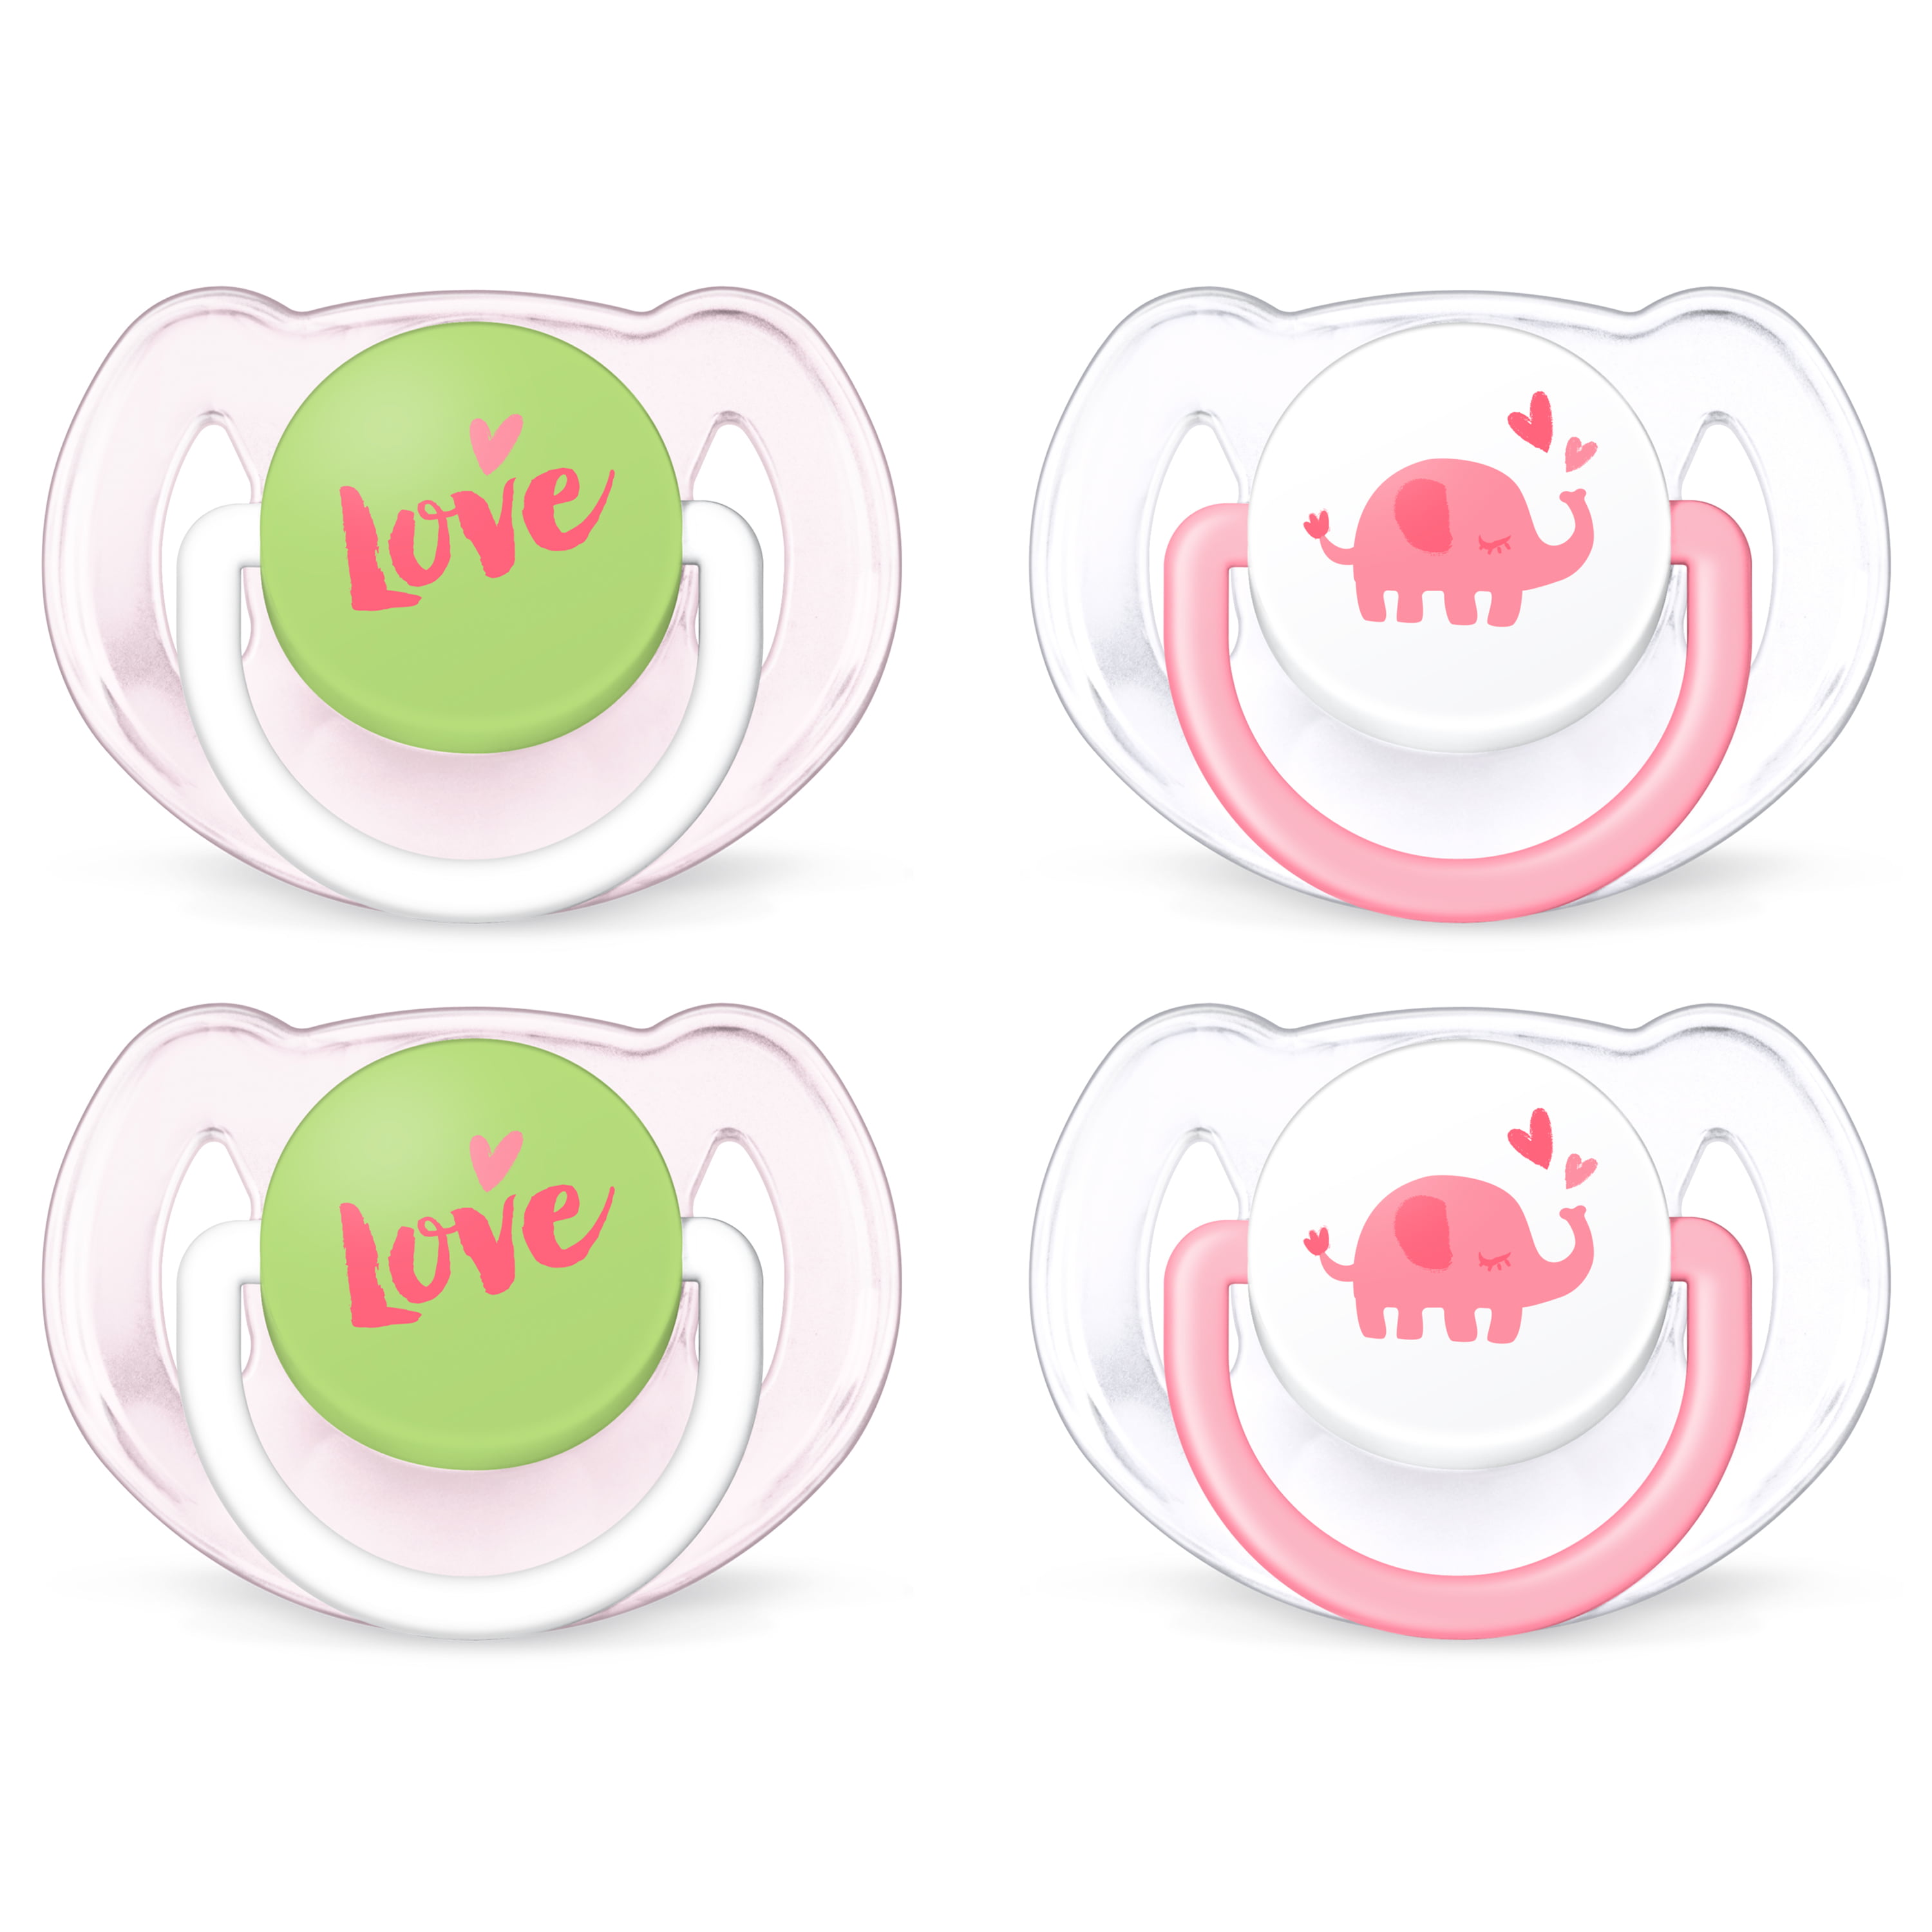 6-18m Pink/Red SCF182/24 Philips Avent Animal Soft Silicone Pacifier w/ Cover 